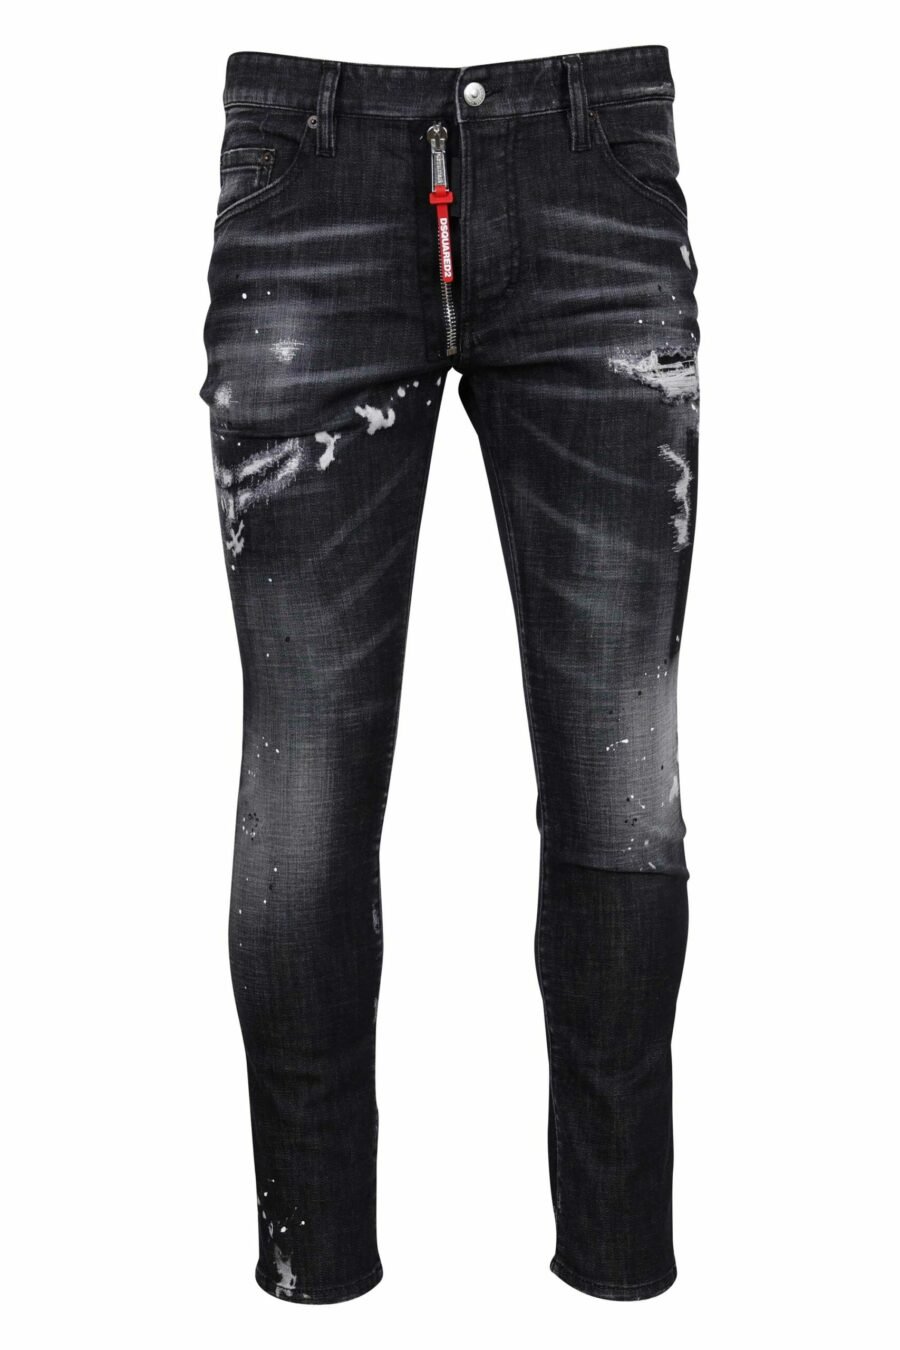 Black "skater jean" trousers with rips and semi-worn - 8054148300746 scaled